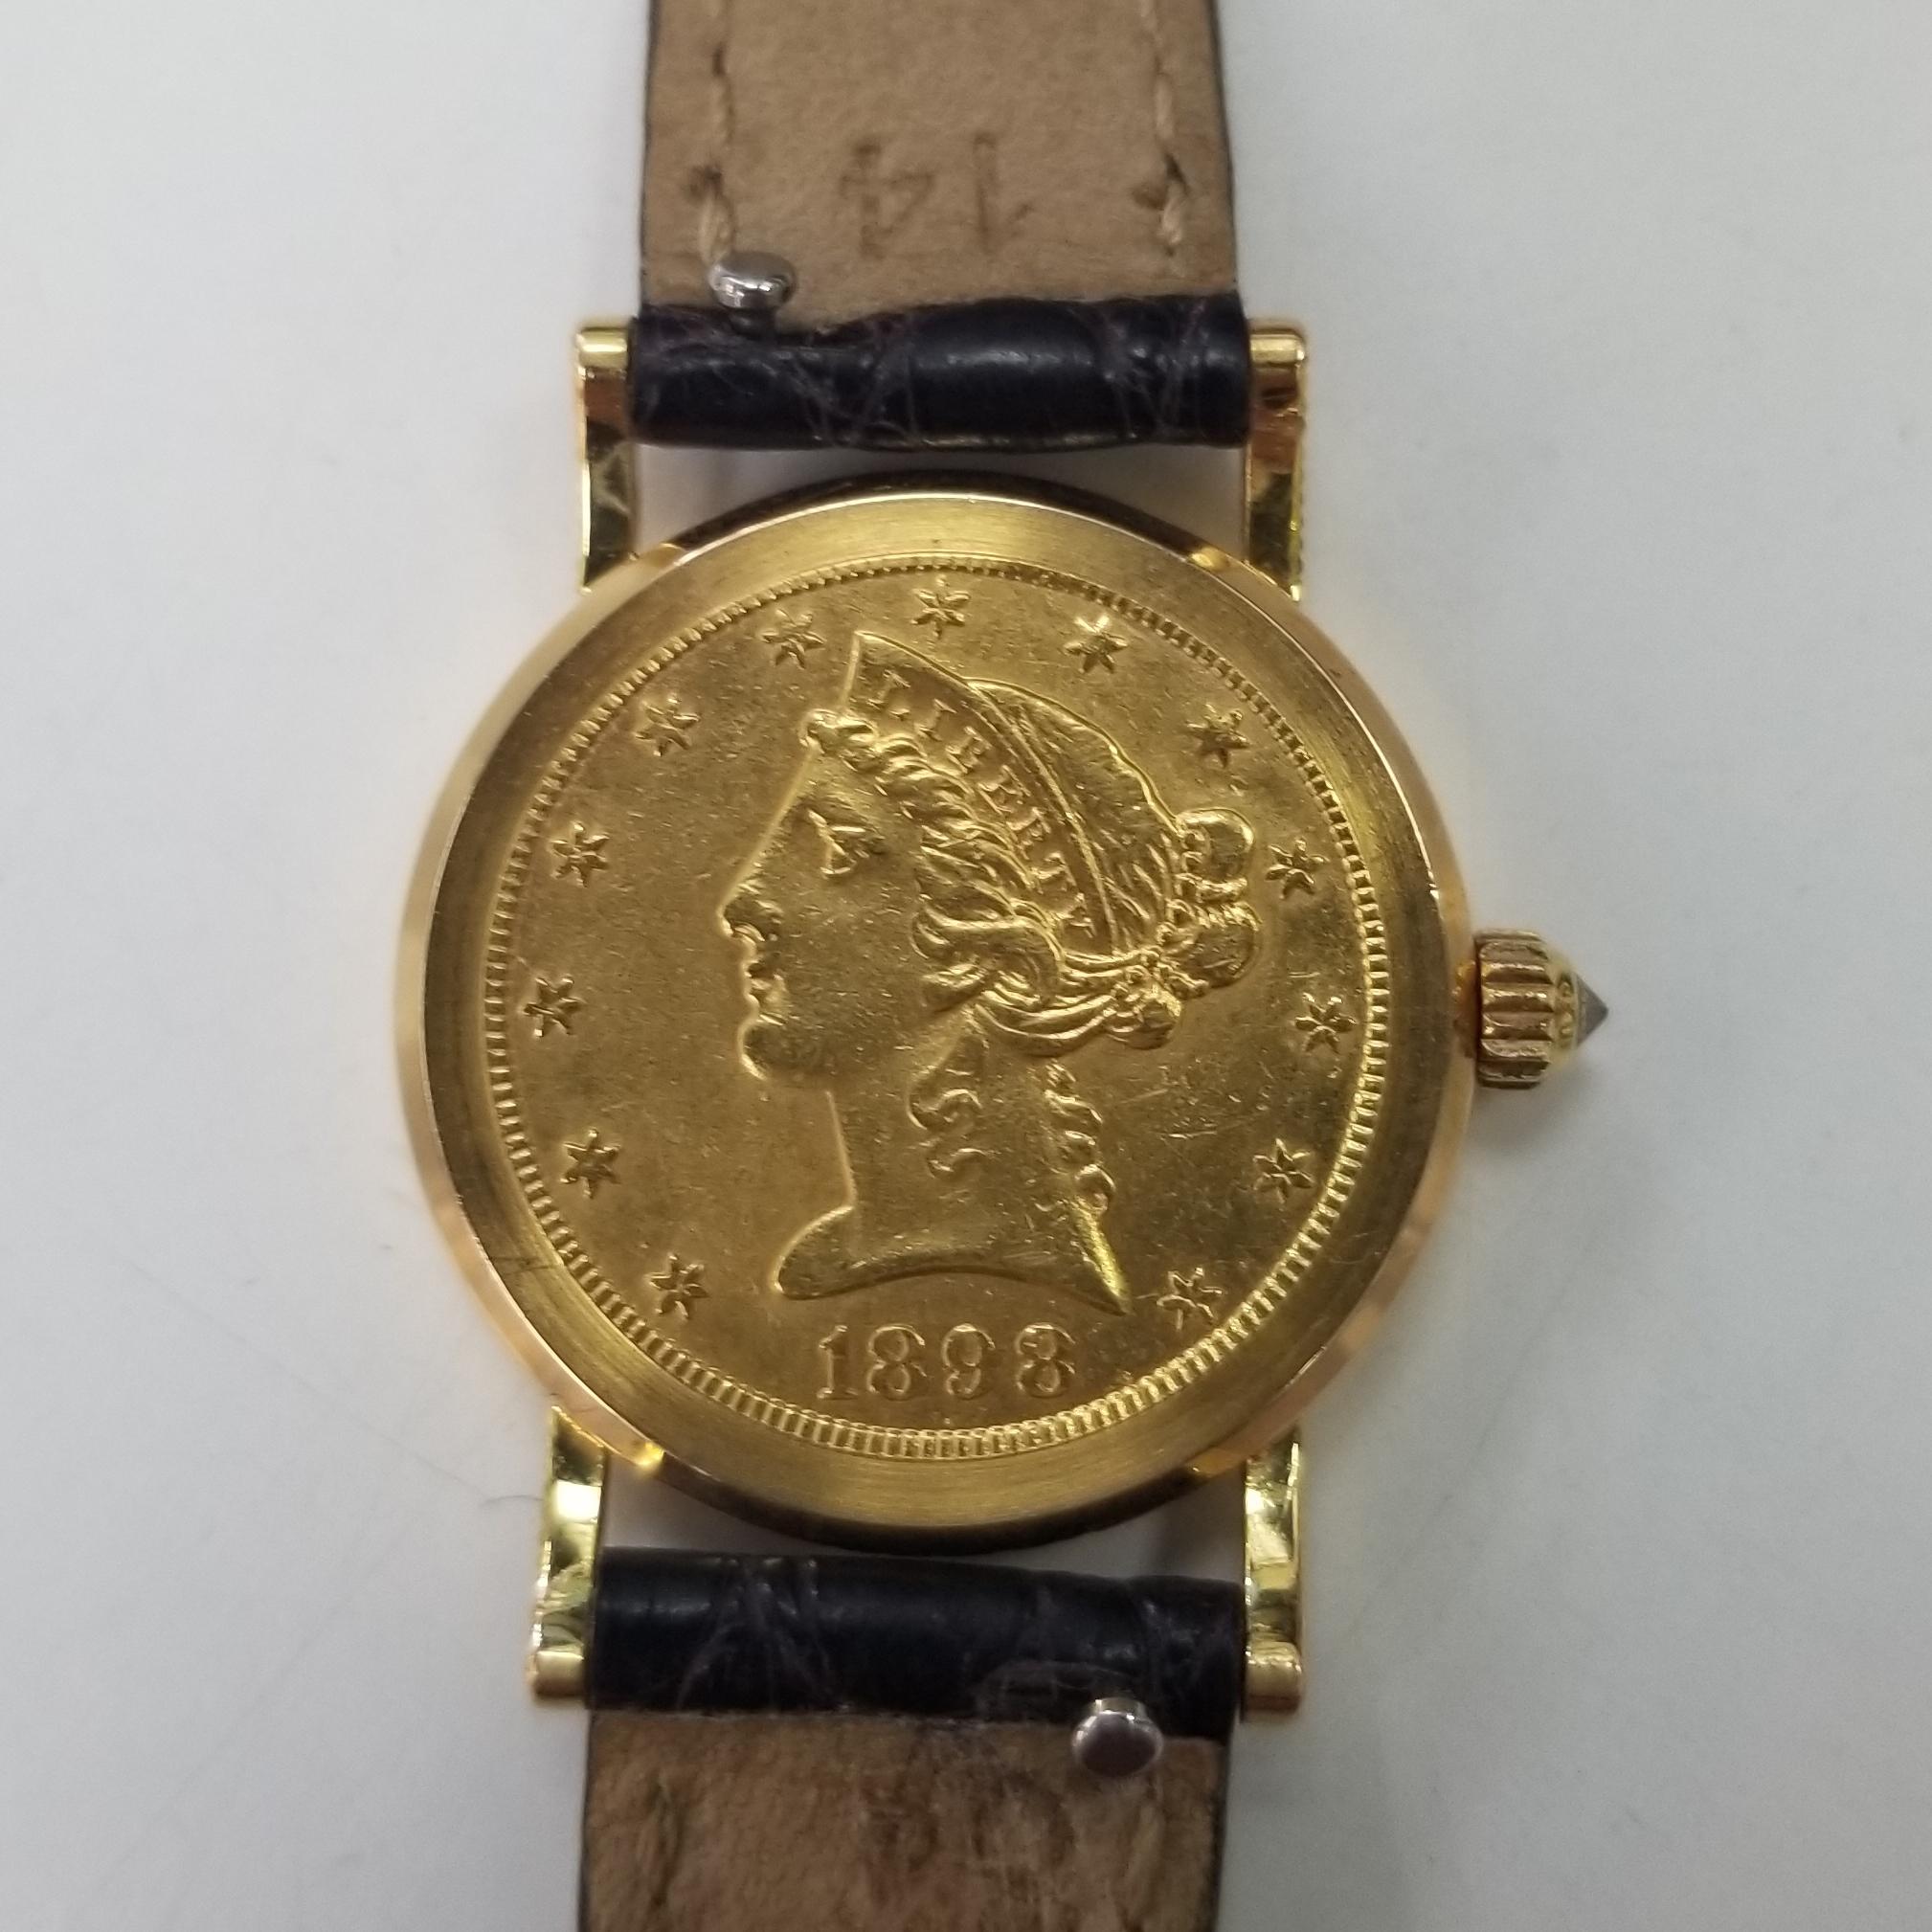 About
1898 $5 Gold Eagle-Liberty Corum Quartz Watch

Watch is keeping good time
Case is 25mm
Leather band
Excellent condition

    Brand: Corum 100% original
    Movement: Quartz
    Case: 18K yellow gold
    Leather belt
    Crystal: Sapphire
   